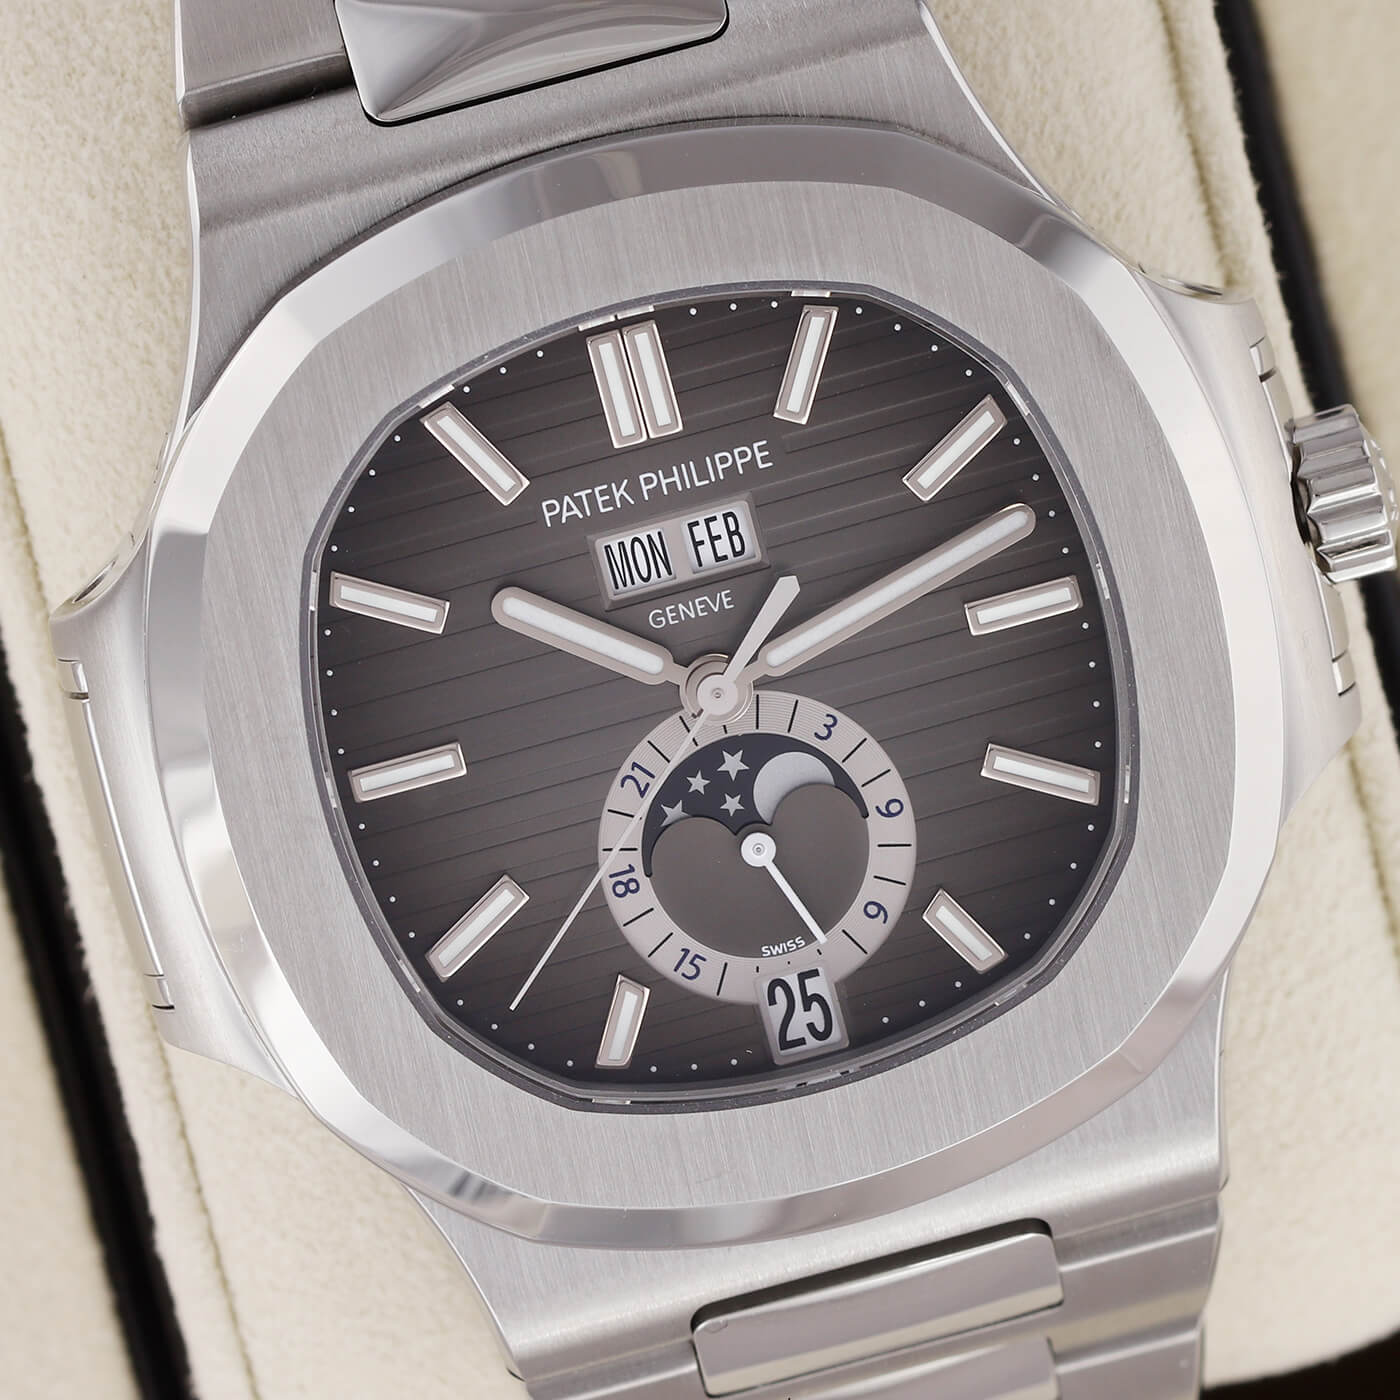 The most sought-after watches on the planet-Patek Philippe Nautilus Replica